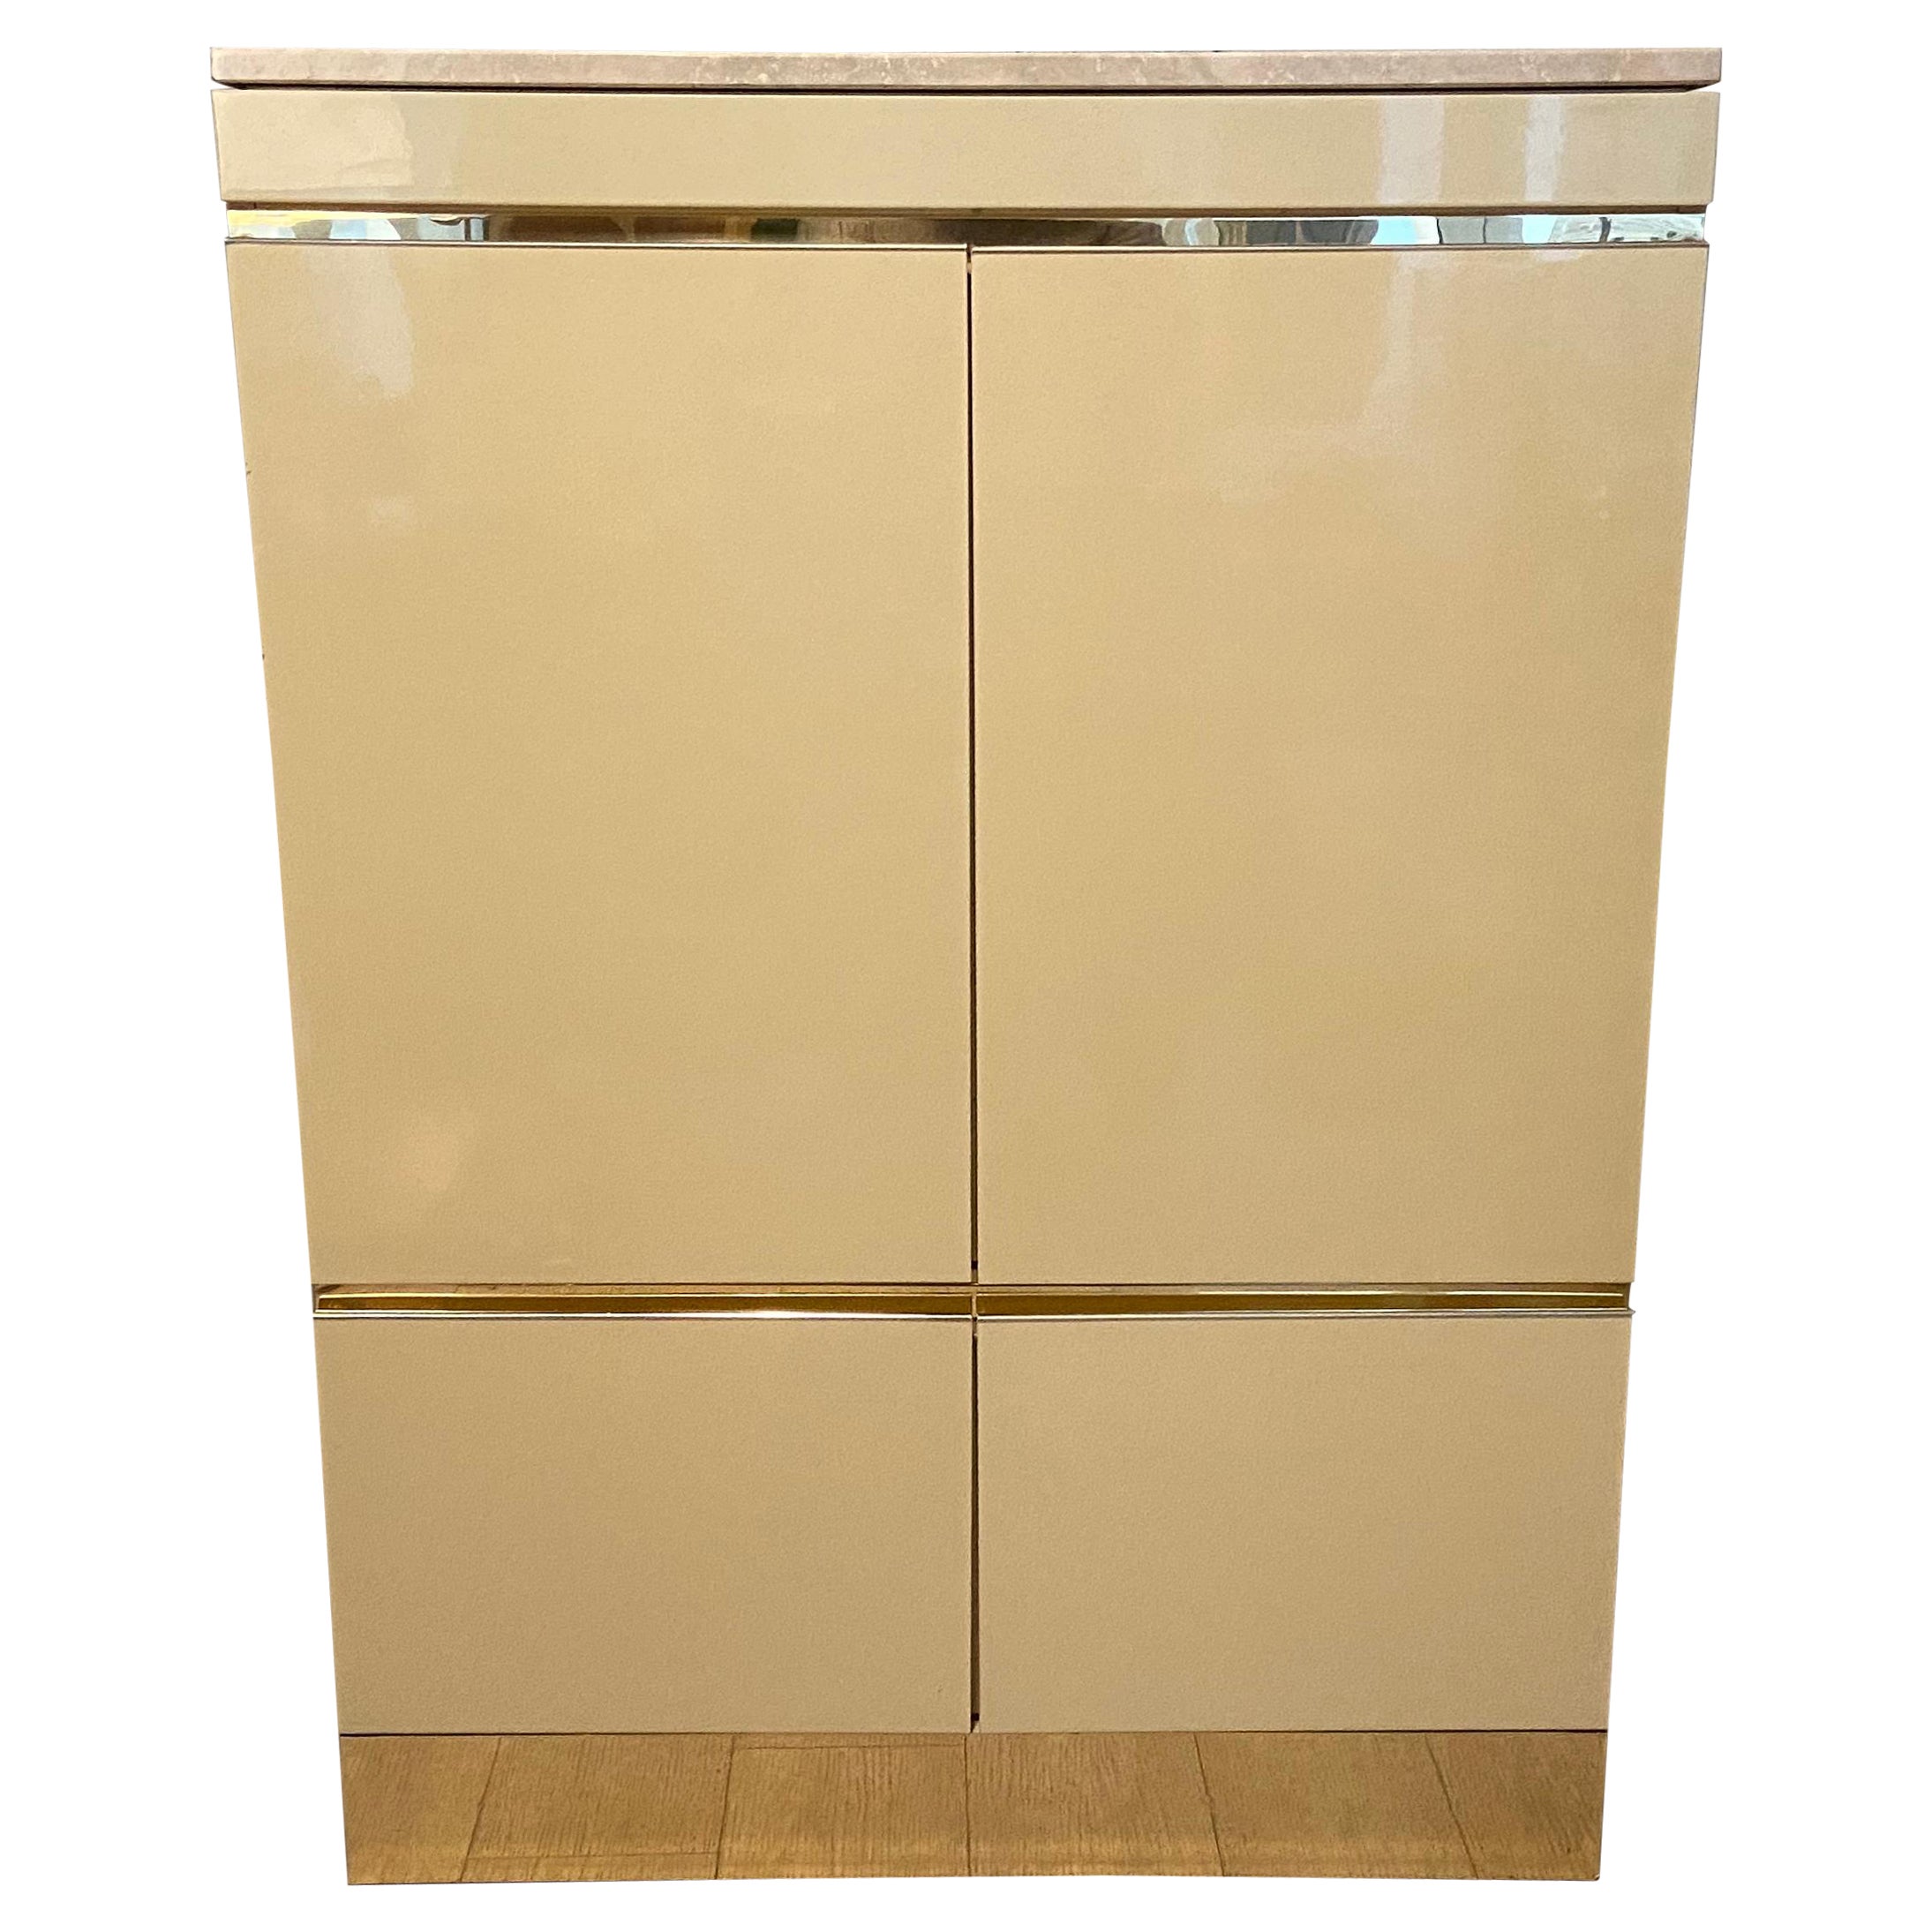 High sideboard, ivory lacquer, gold and travertine, 1970
High sideboard with 4 ivory lacquered doors with golden ornaments and travertine top. Produced in the 70s. In the style of JC Mahey. Good vintage condition.